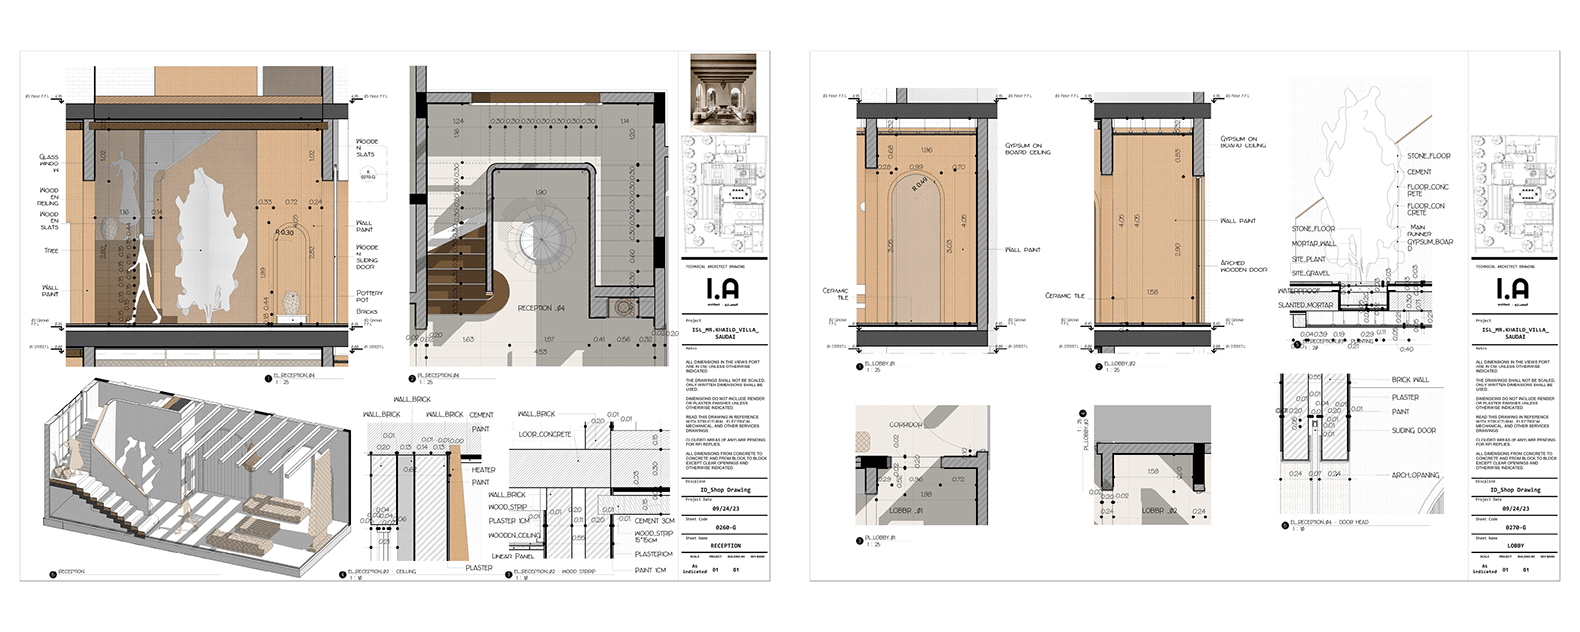 TECHNICAL DRAWING & SHOPDRAWING